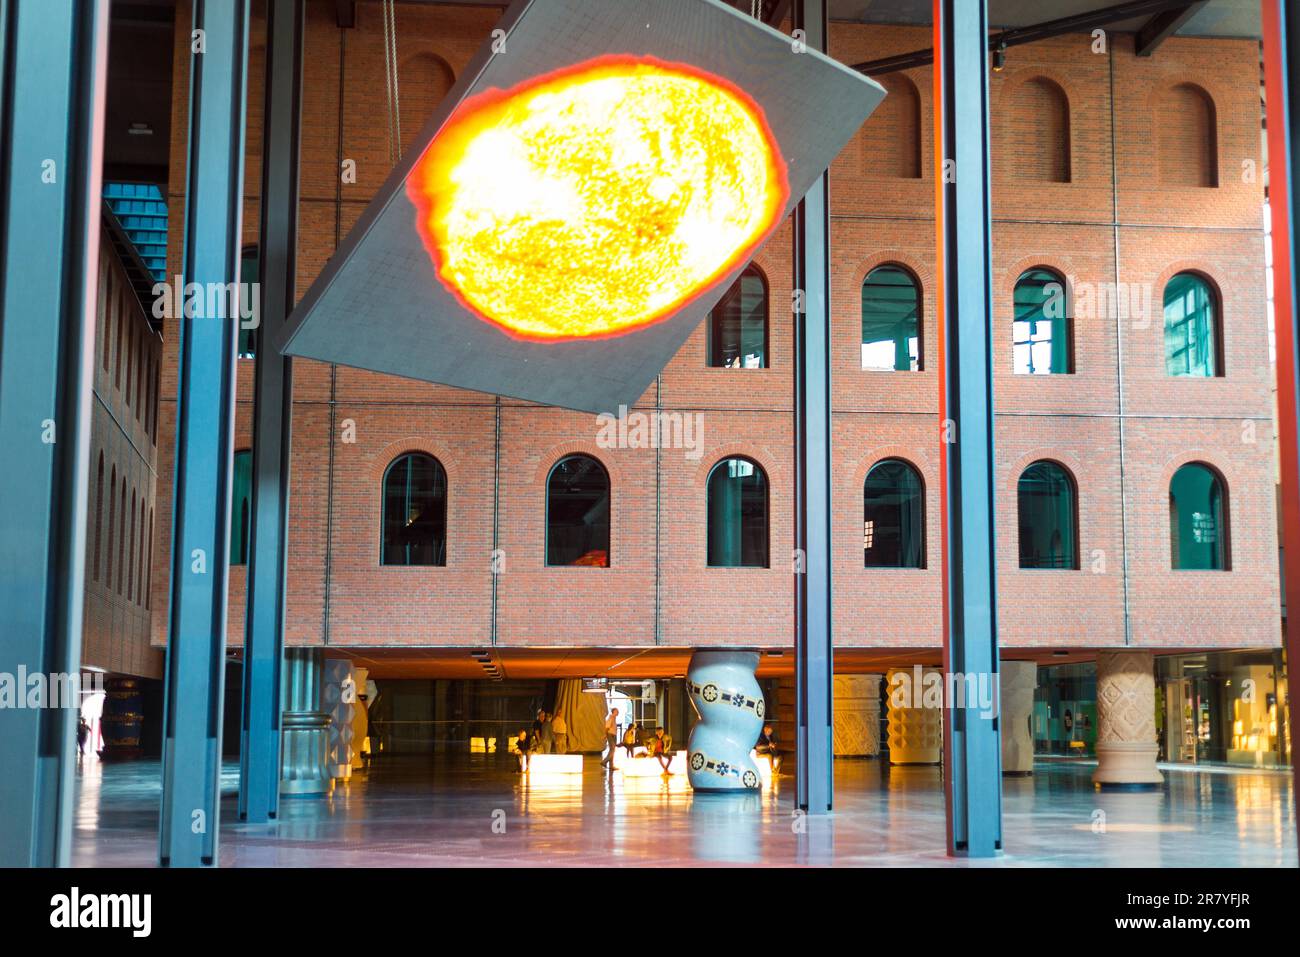 Huge electronic visual display in the Azkuna Centre, in Basque Azkuna Zentroa, shows the sun and gives information in the multi-purpose venue Stock Photo